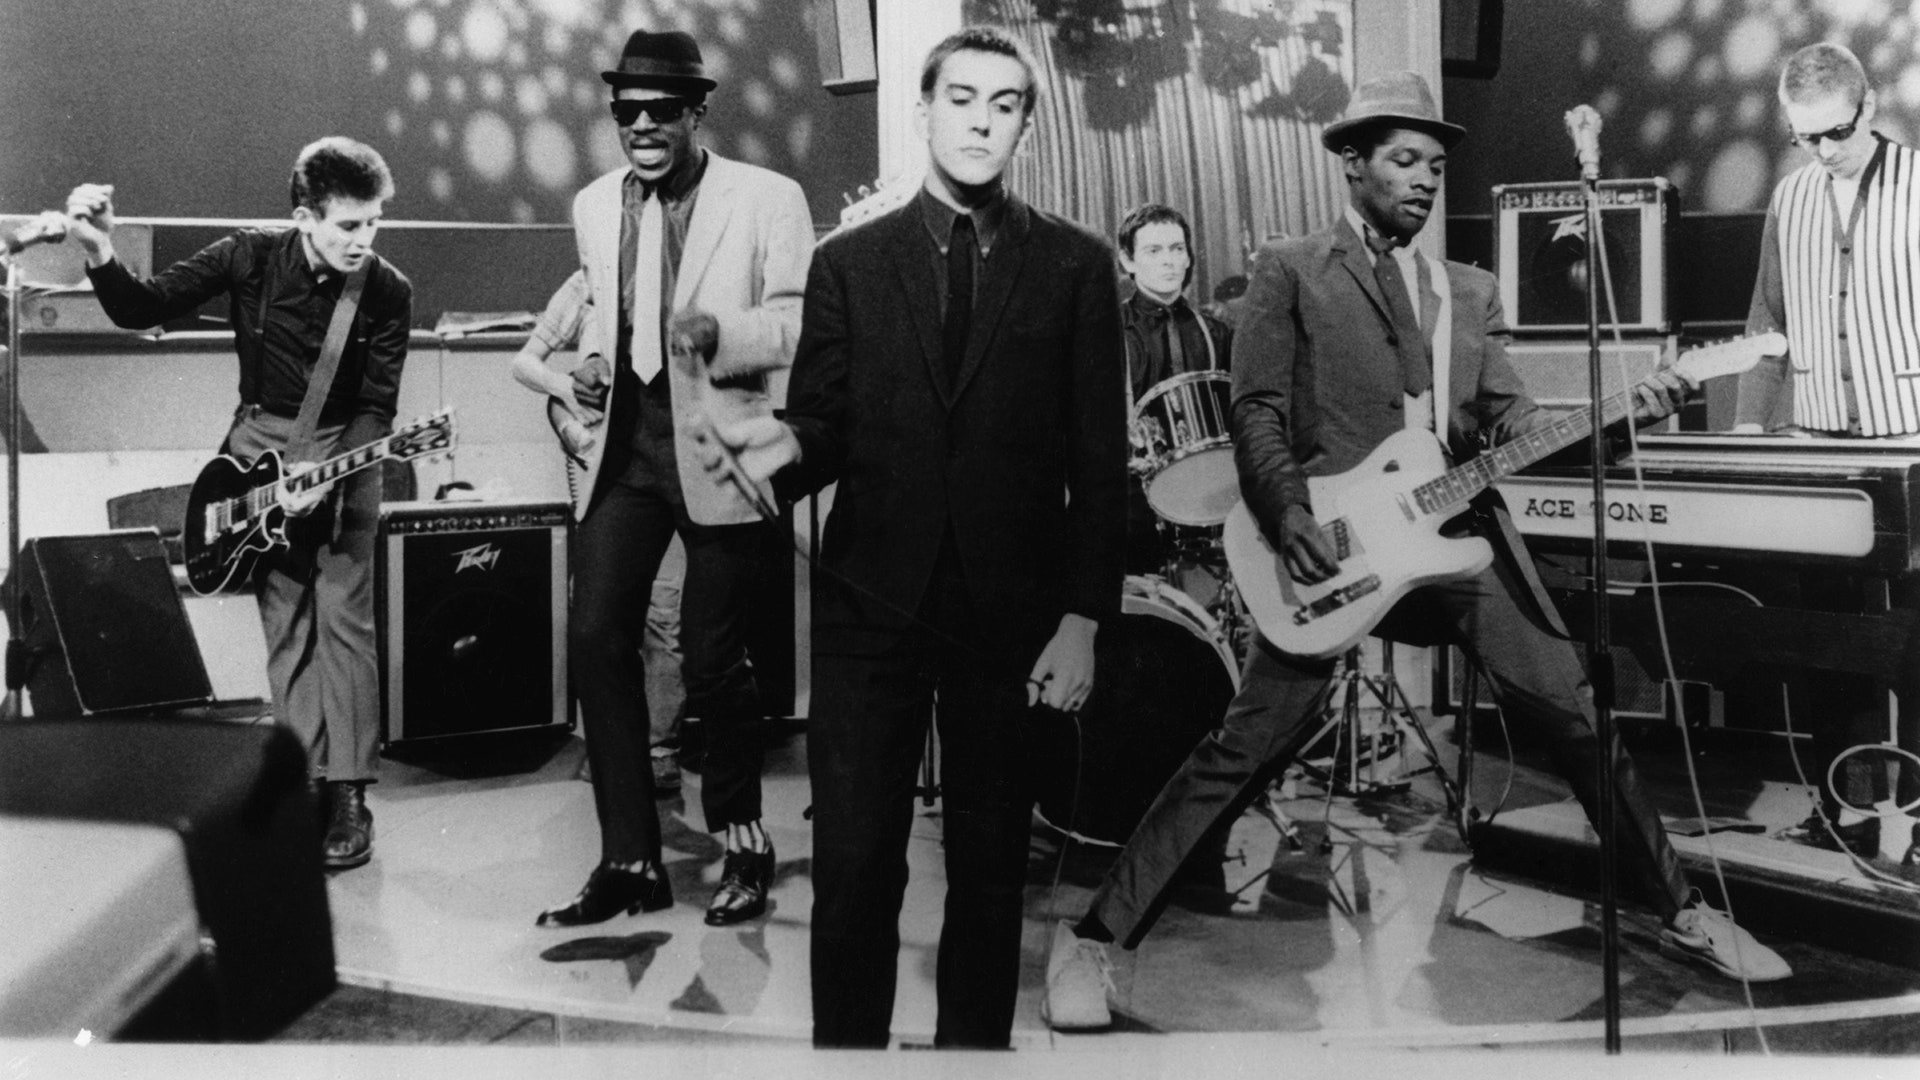 The Specials' Jerry Dammers was the Lennon and McCartney of ska